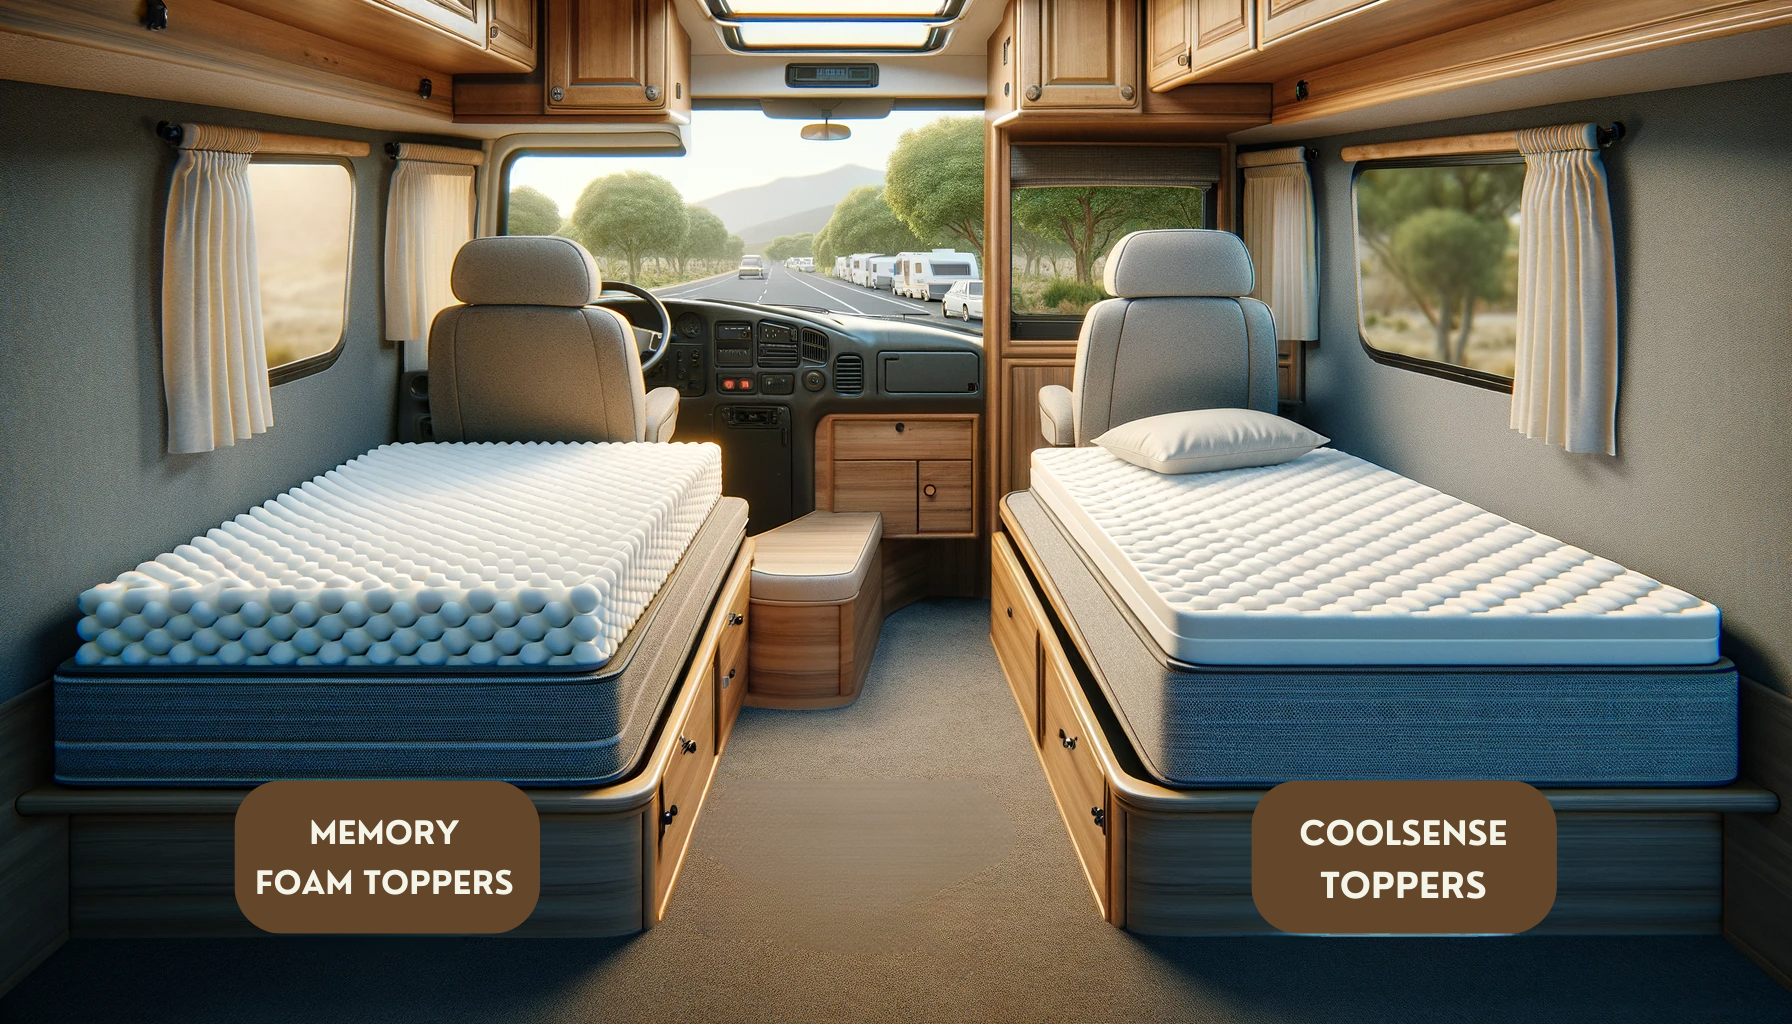 The visual showcases the variety, including memory foam, custom-made, and specialty toppers, highlighting their unique features and suitability for different travel vehicle beds